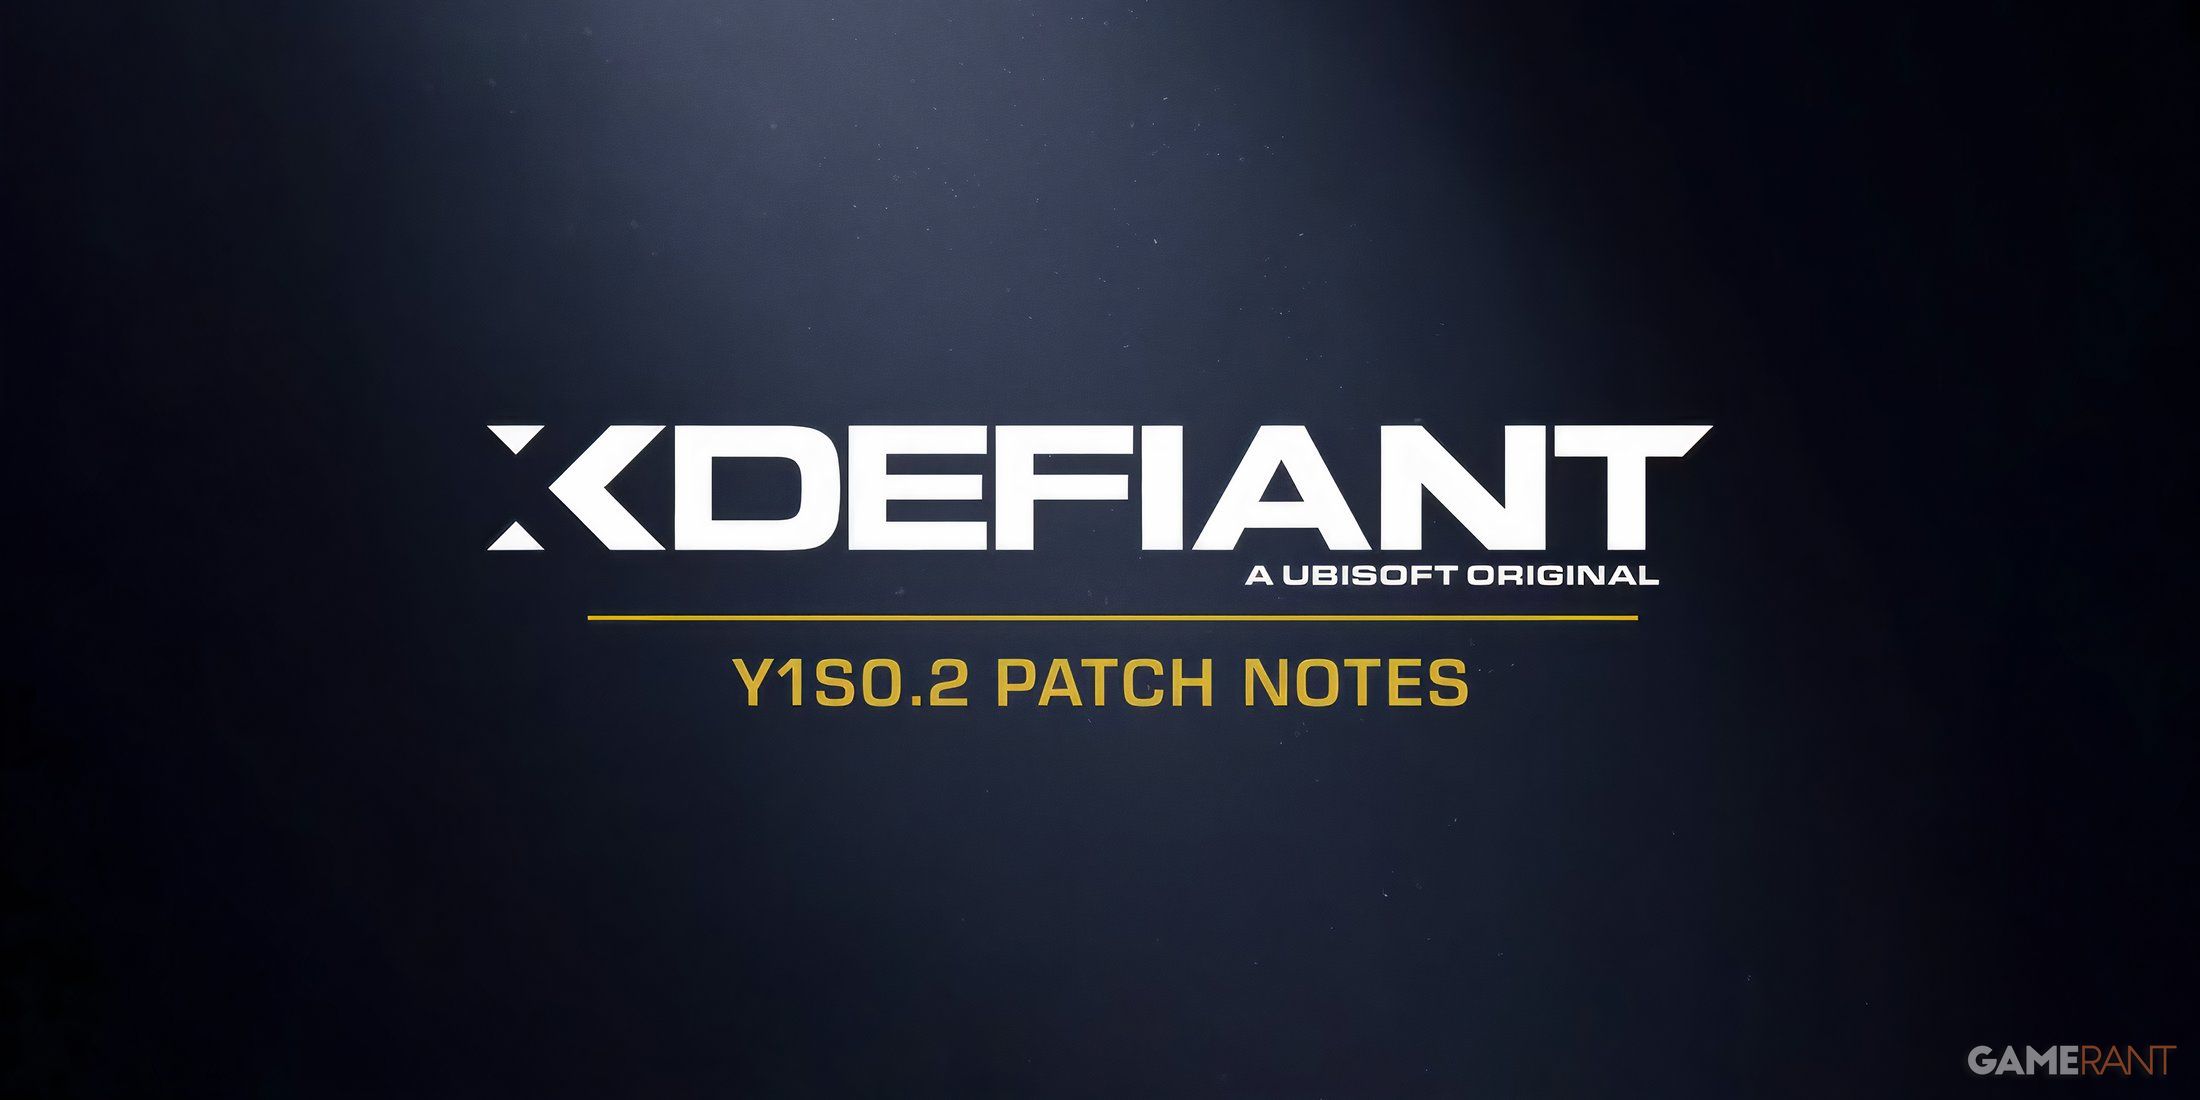 xdefiant-new-update-y1s0-2-patch-notes-game-rant-1